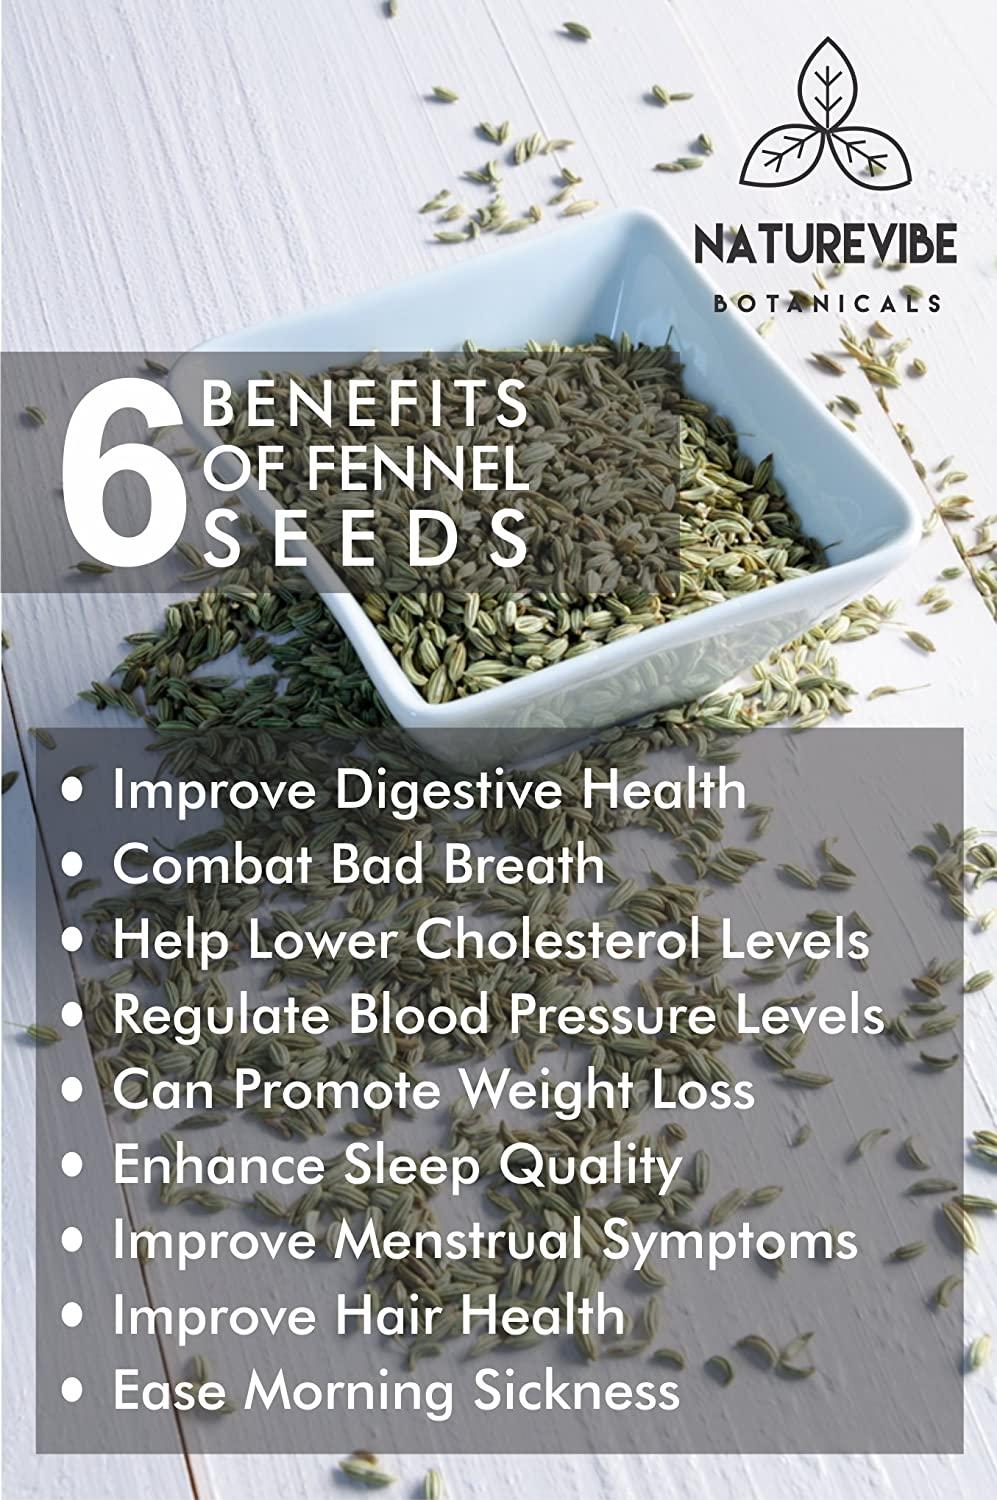 Naturevibe Botanicals Organic Fennel Seeds, 5lbs | Foeniculum Vulgare |  Gluten Free & Non-GMO | Adds Flavor | Add to Healthy snacks (80 ounces)